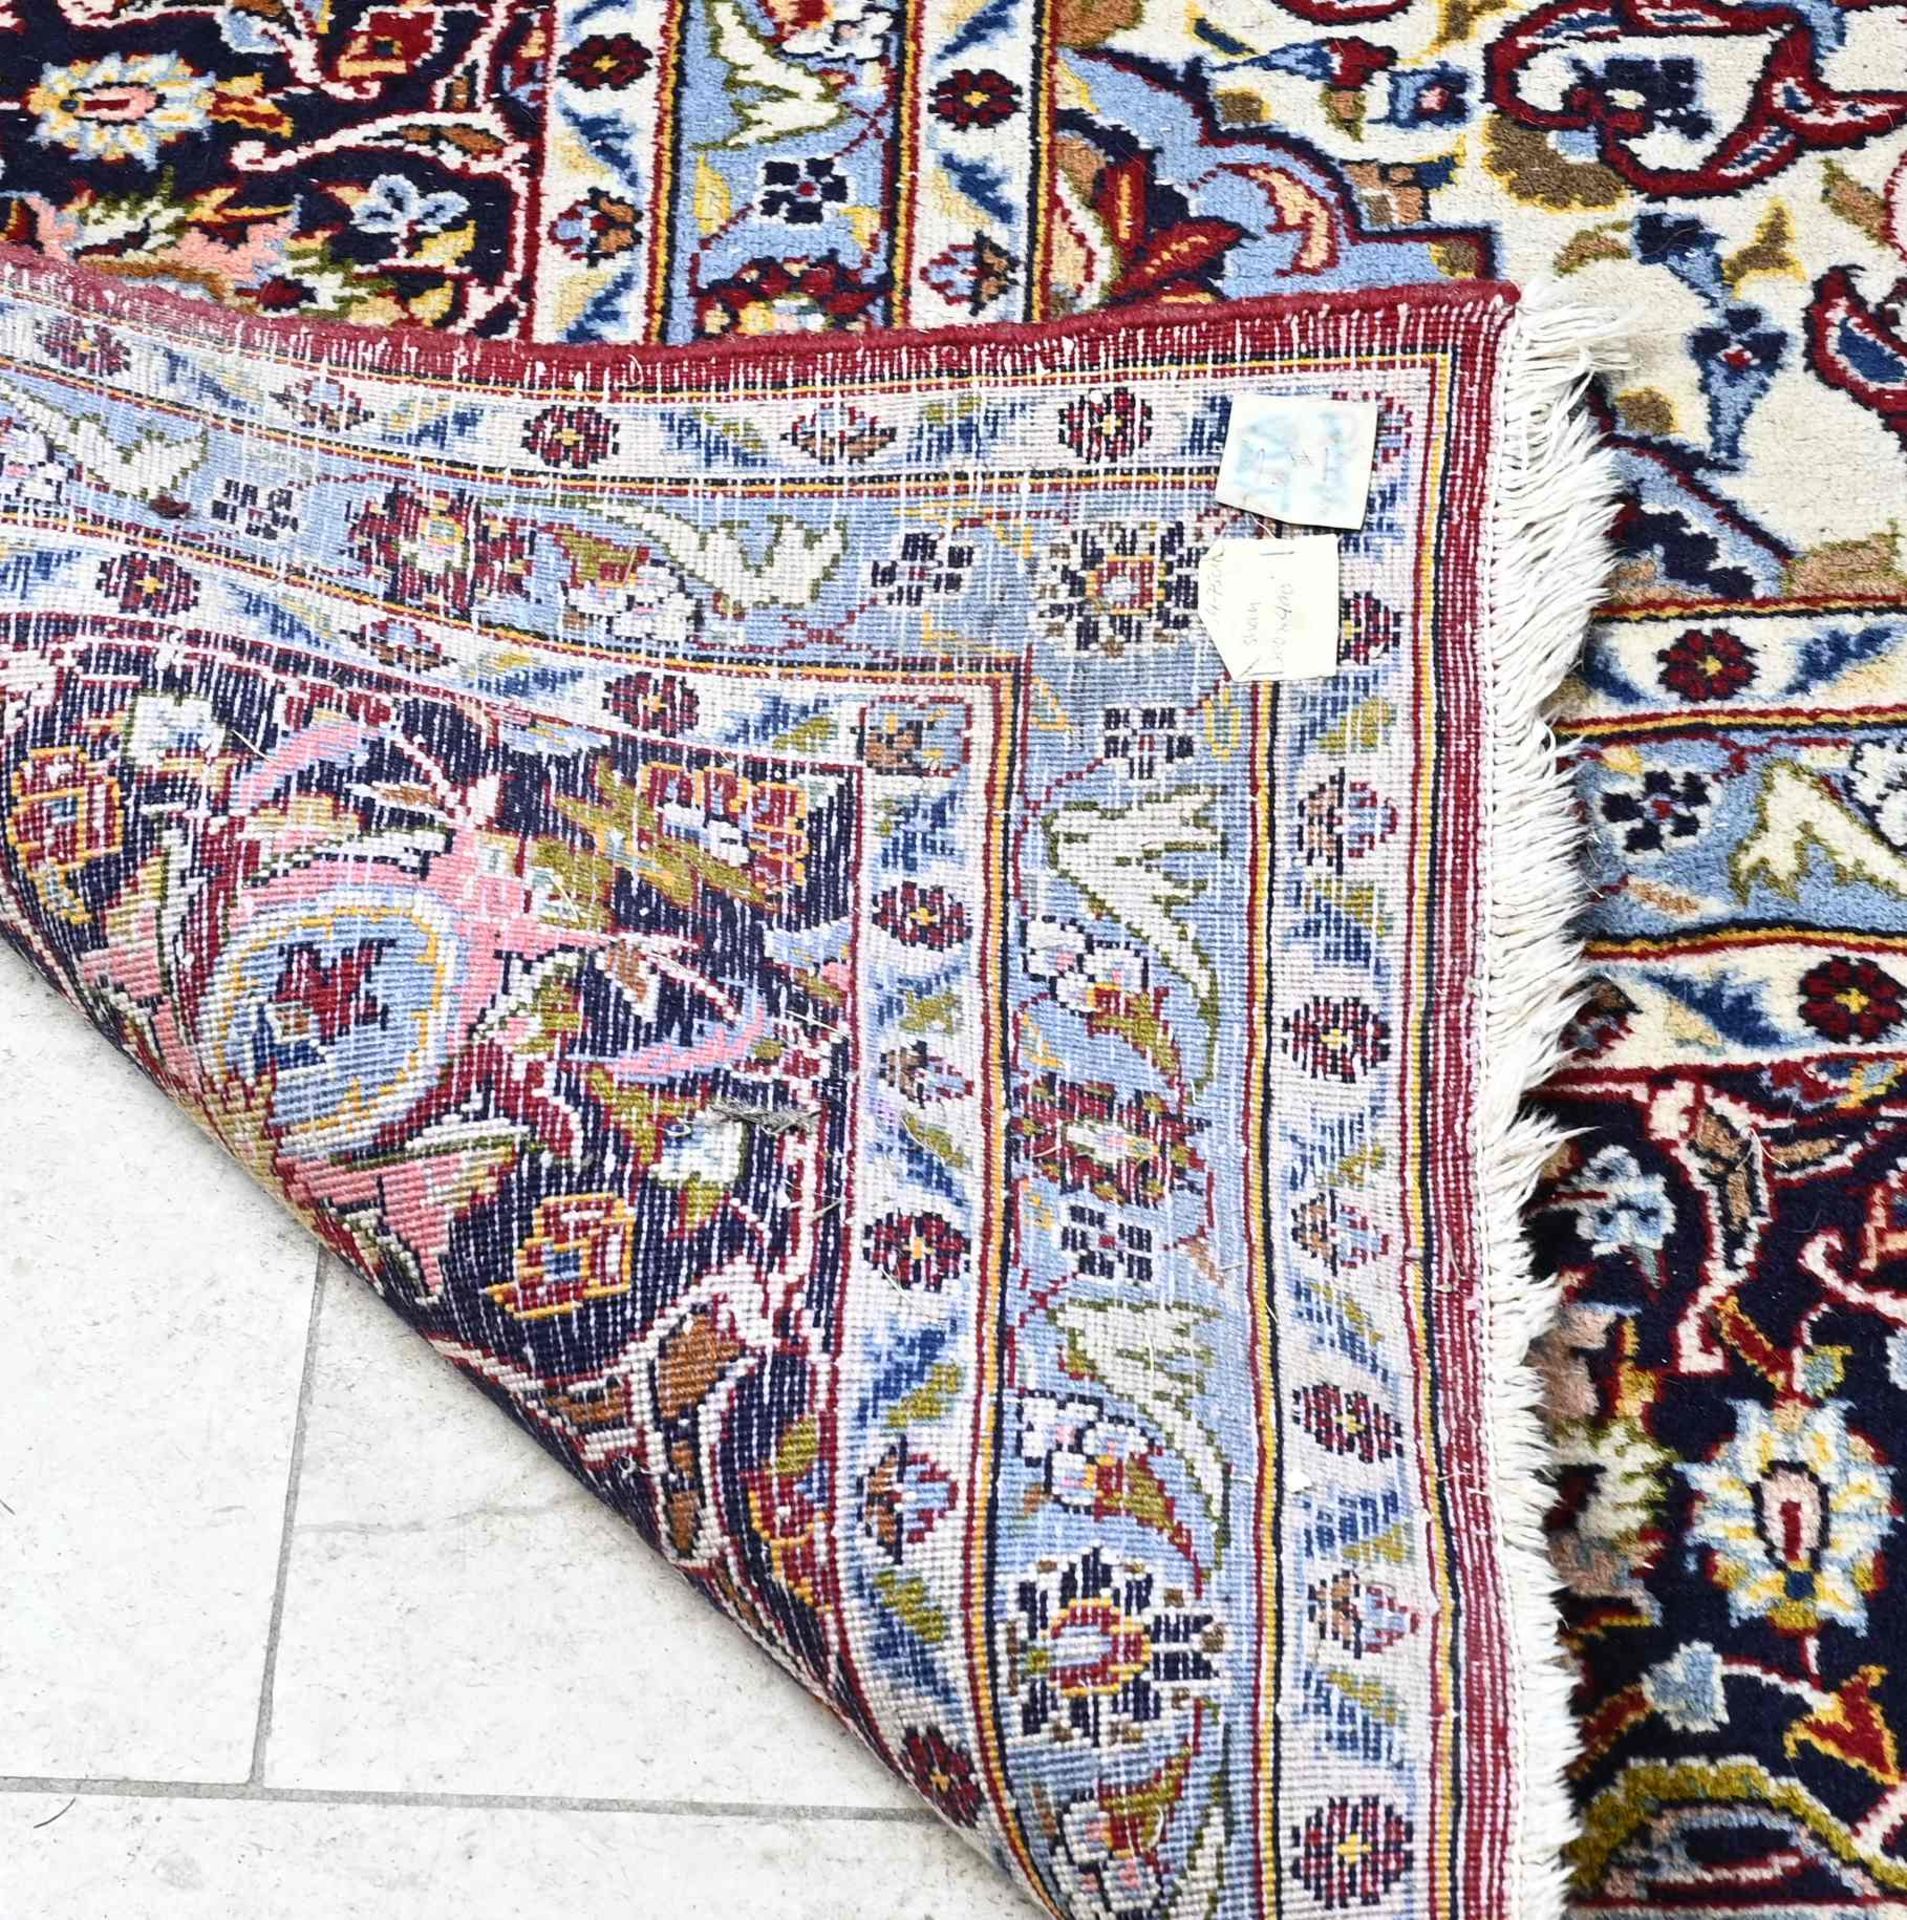 Large Persian rug, 300 x 400 cm. - Image 3 of 3